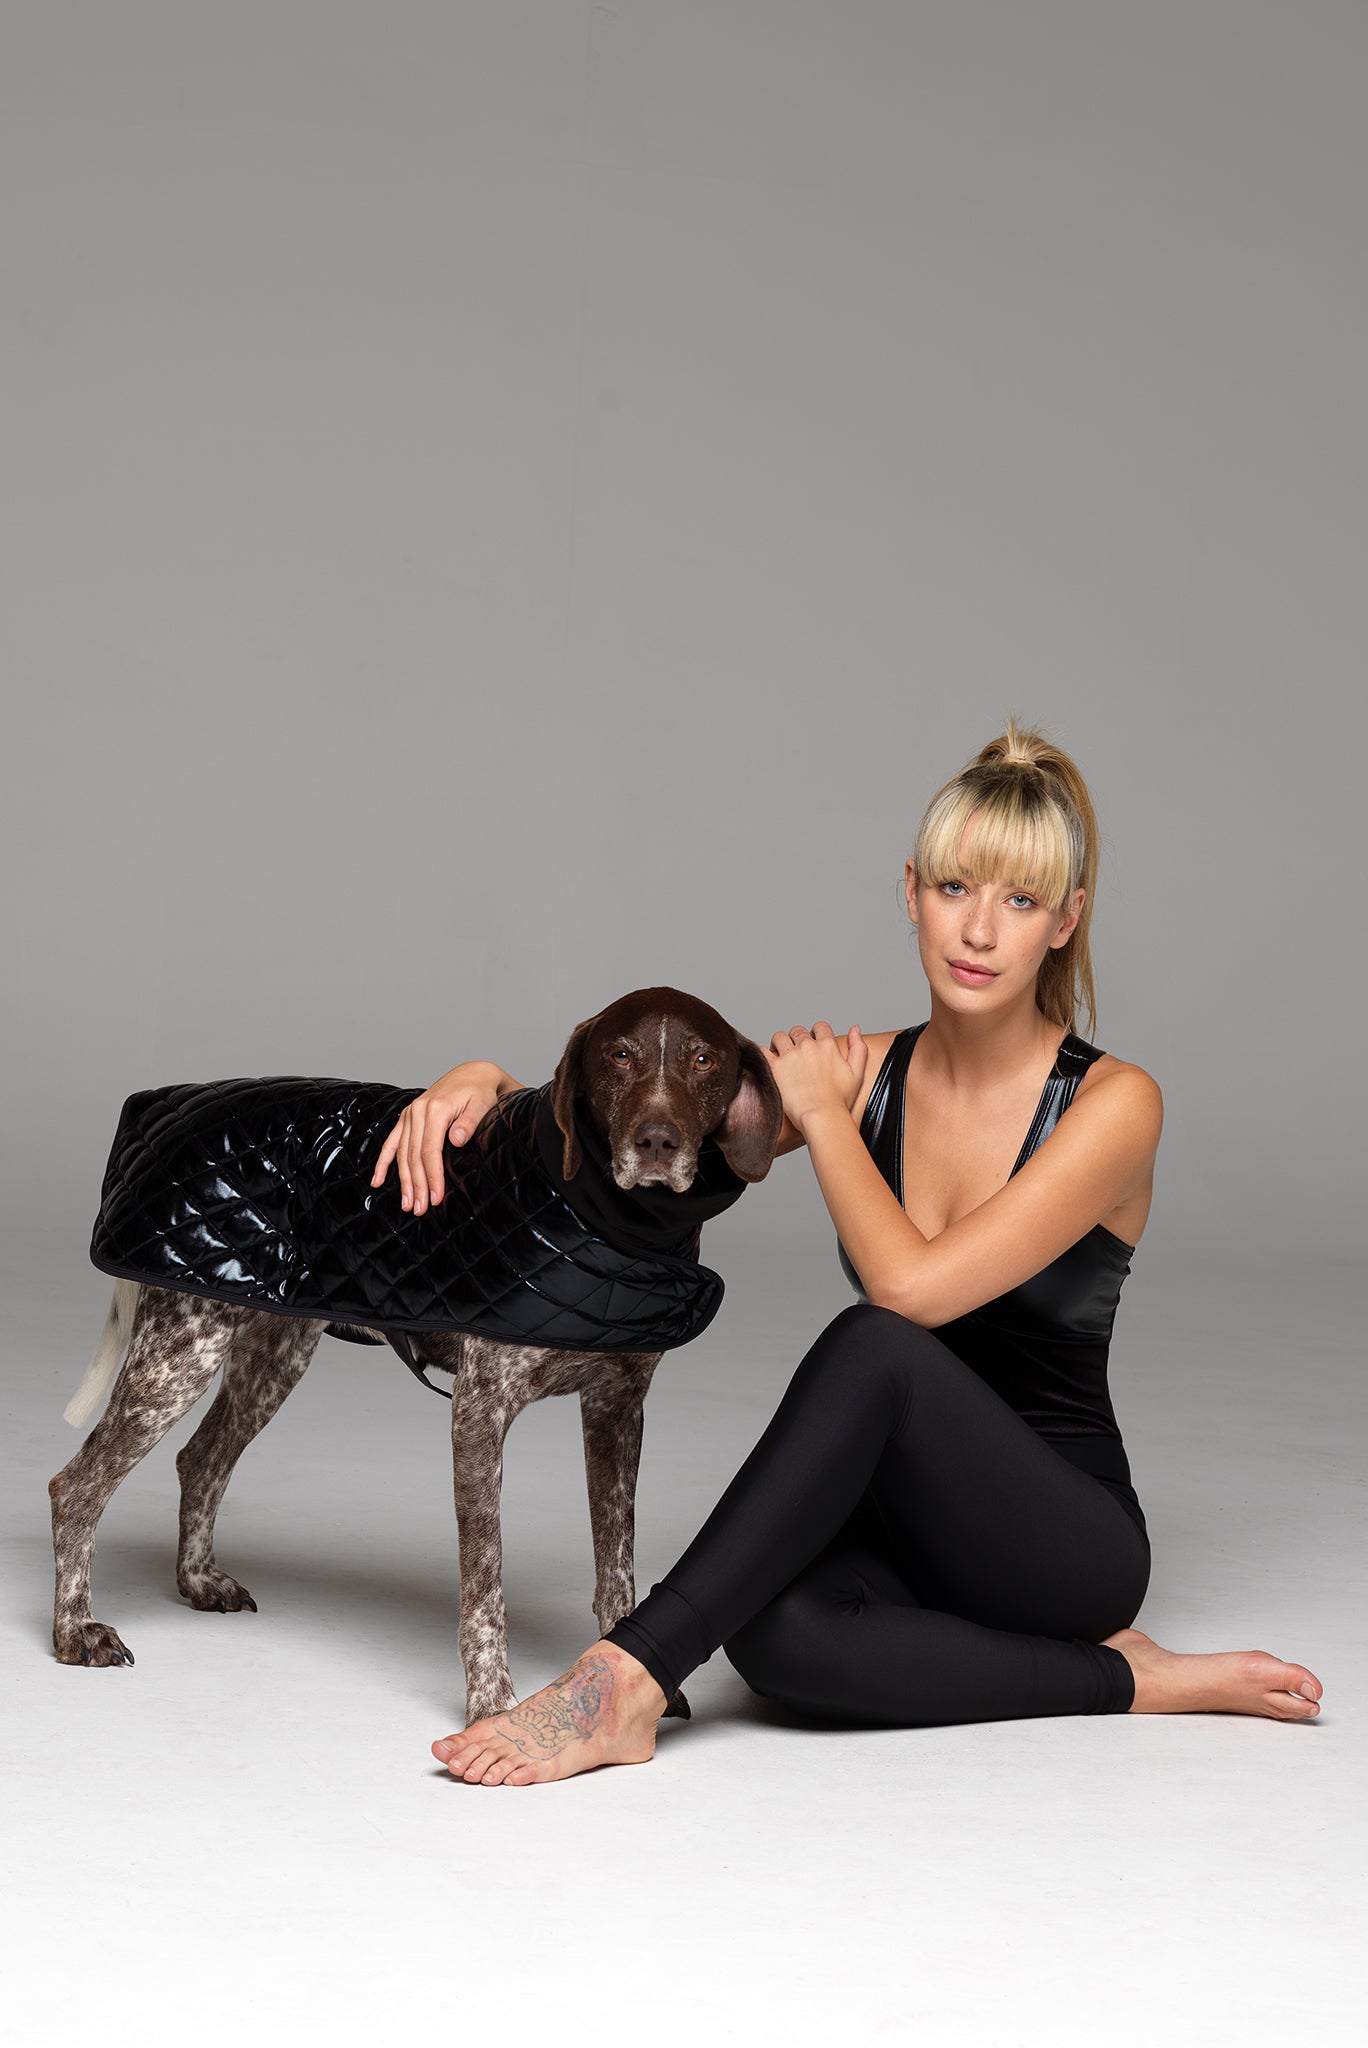 Looking for a matching outfit? Your precious canine can match with mum in the Alpha Dog Jacket in Liquid Black.